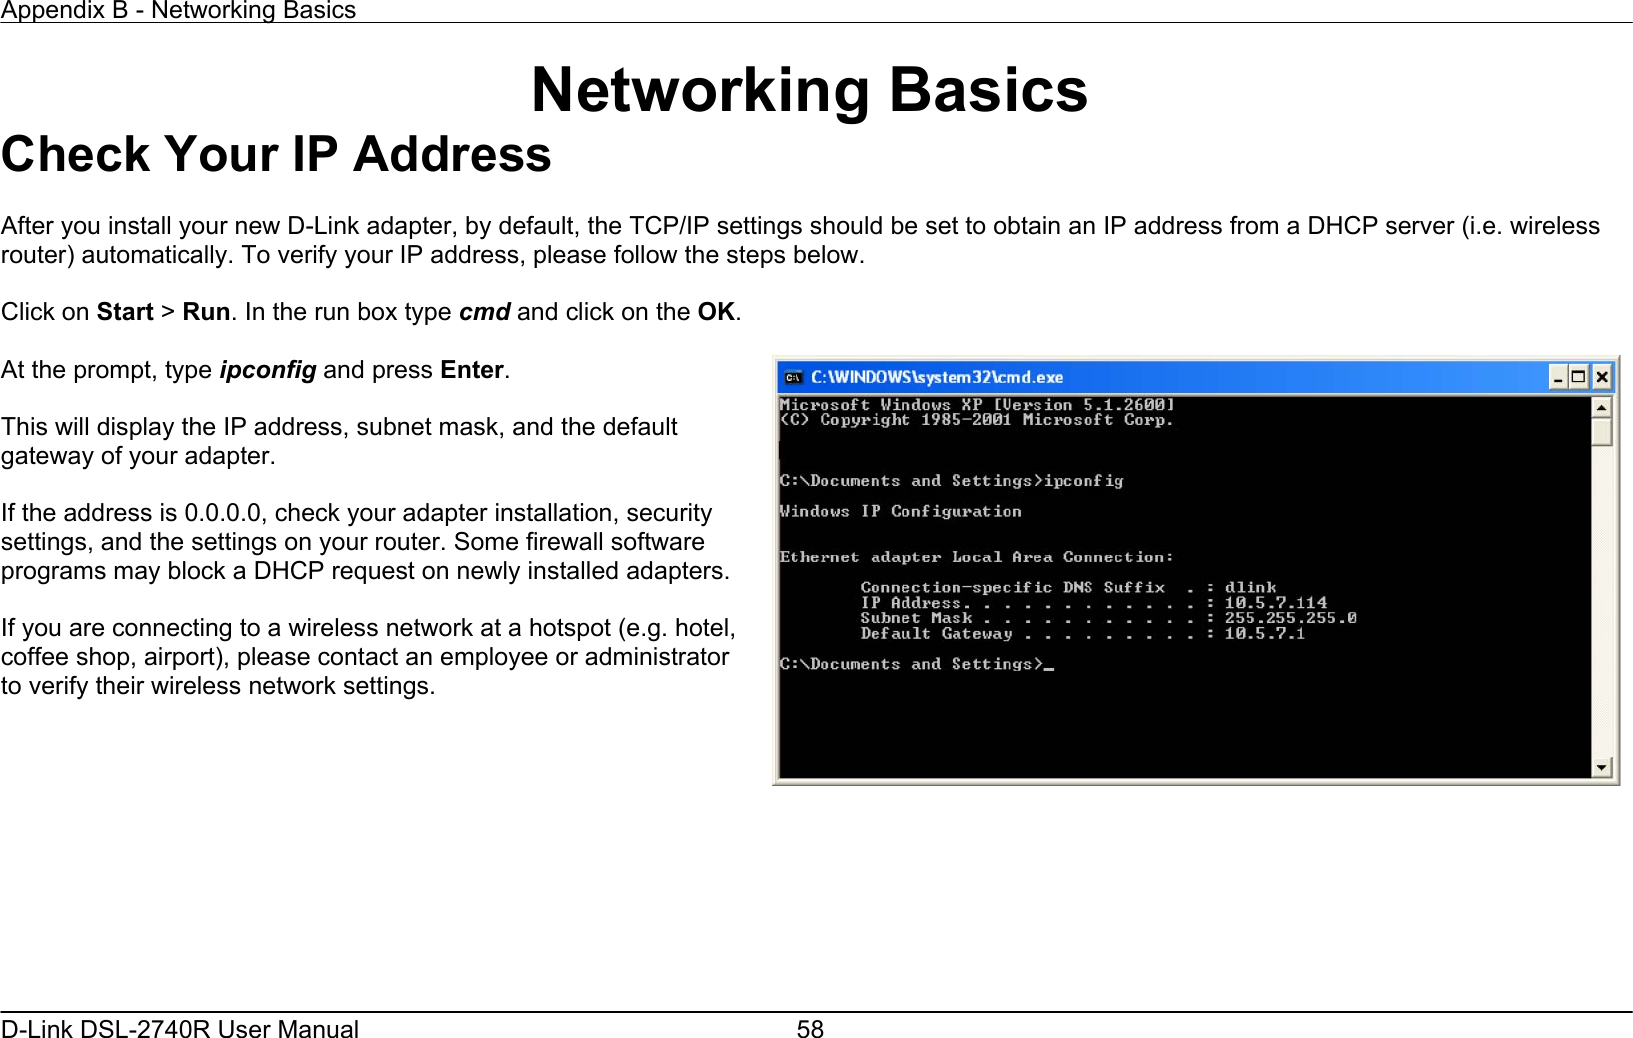 Appendix B - Networking Basics   D-Link DSL-2740R User Manual  58Networking Basics Check Your IP Address  After you install your new D-Link adapter, by default, the TCP/IP settings should be set to obtain an IP address from a DHCP server (i.e. wireless router) automatically. To verify your IP address, please follow the steps below.  Click on Start &gt; Run. In the run box type cmd and click on the OK.  At the prompt, type ipconfig and press Enter.  This will display the IP address, subnet mask, and the default gateway of your adapter.  If the address is 0.0.0.0, check your adapter installation, security settings, and the settings on your router. Some firewall software programs may block a DHCP request on newly installed adapters.  If you are connecting to a wireless network at a hotspot (e.g. hotel, coffee shop, airport), please contact an employee or administrator to verify their wireless network settings.    